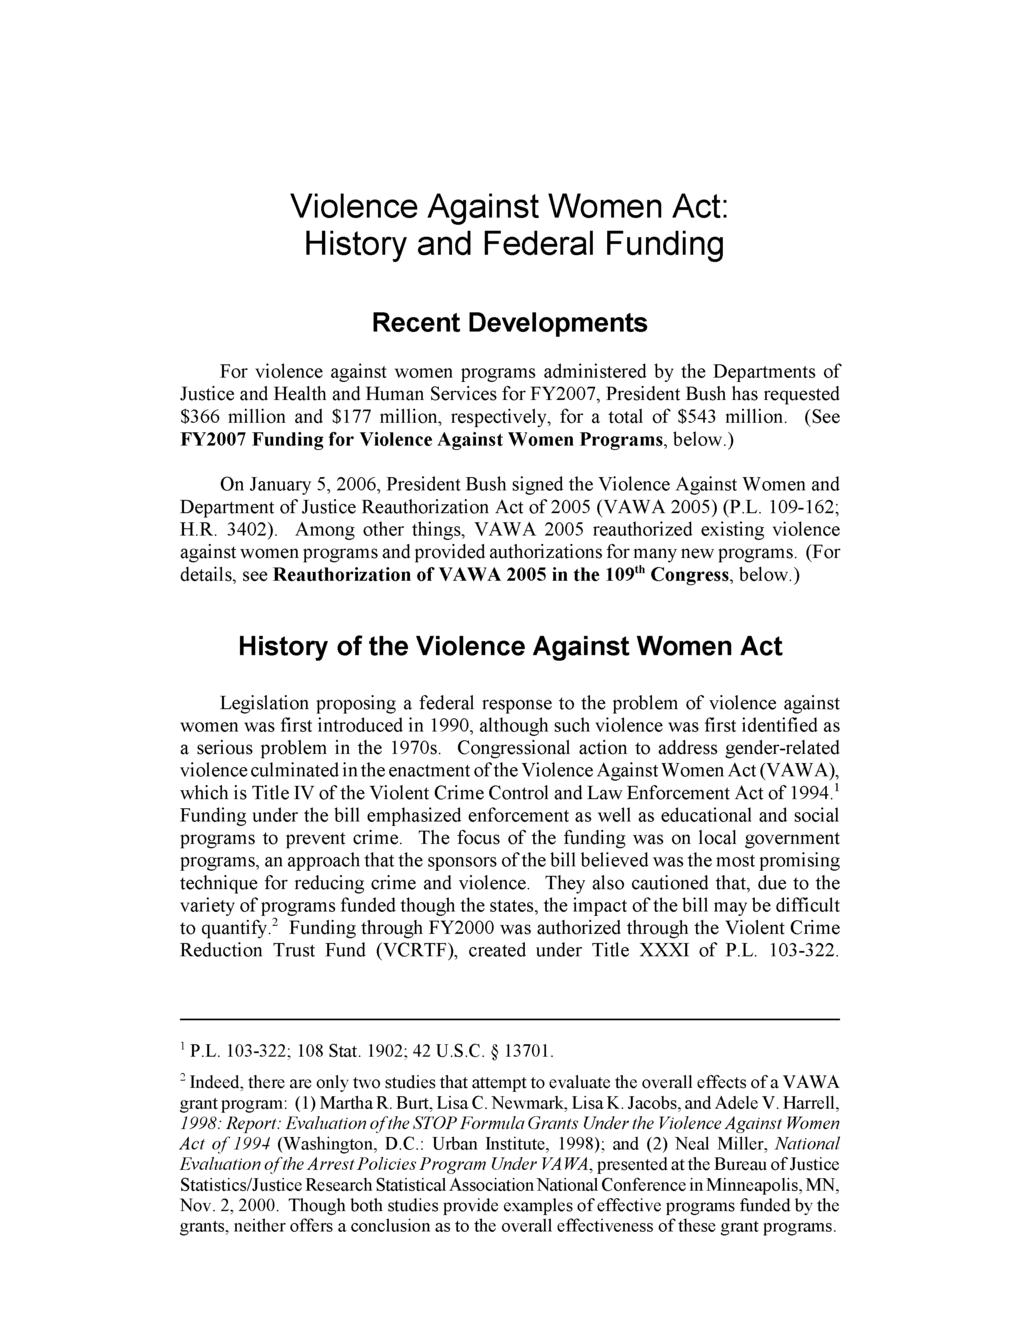 Violence Against Women Act: History and Federal Funding Recent Developments For violence against women programs administered by the Departments of Justice and Health and Human Services for FY2007,